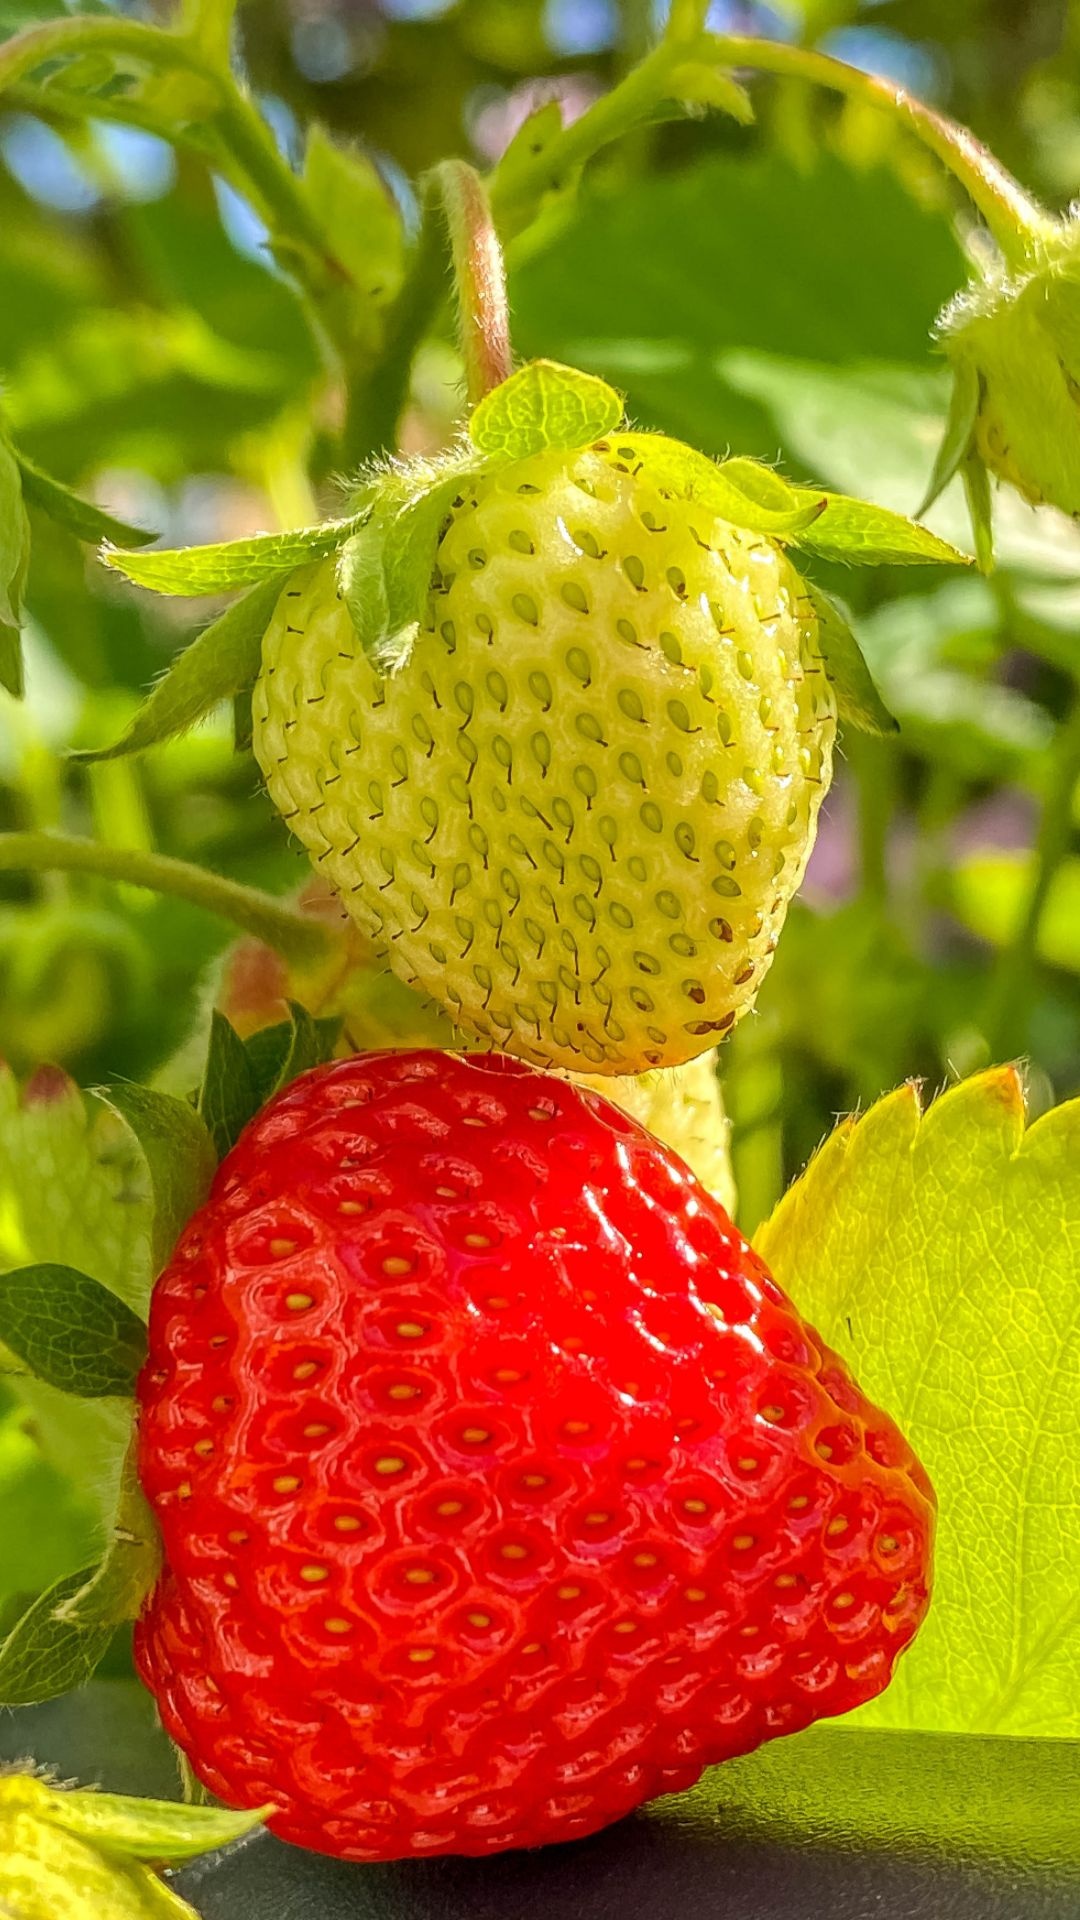 Strawberry: An aggregate accessory fruit, Develop from the receptacle of the flower. 1080x1920 Full HD Wallpaper.